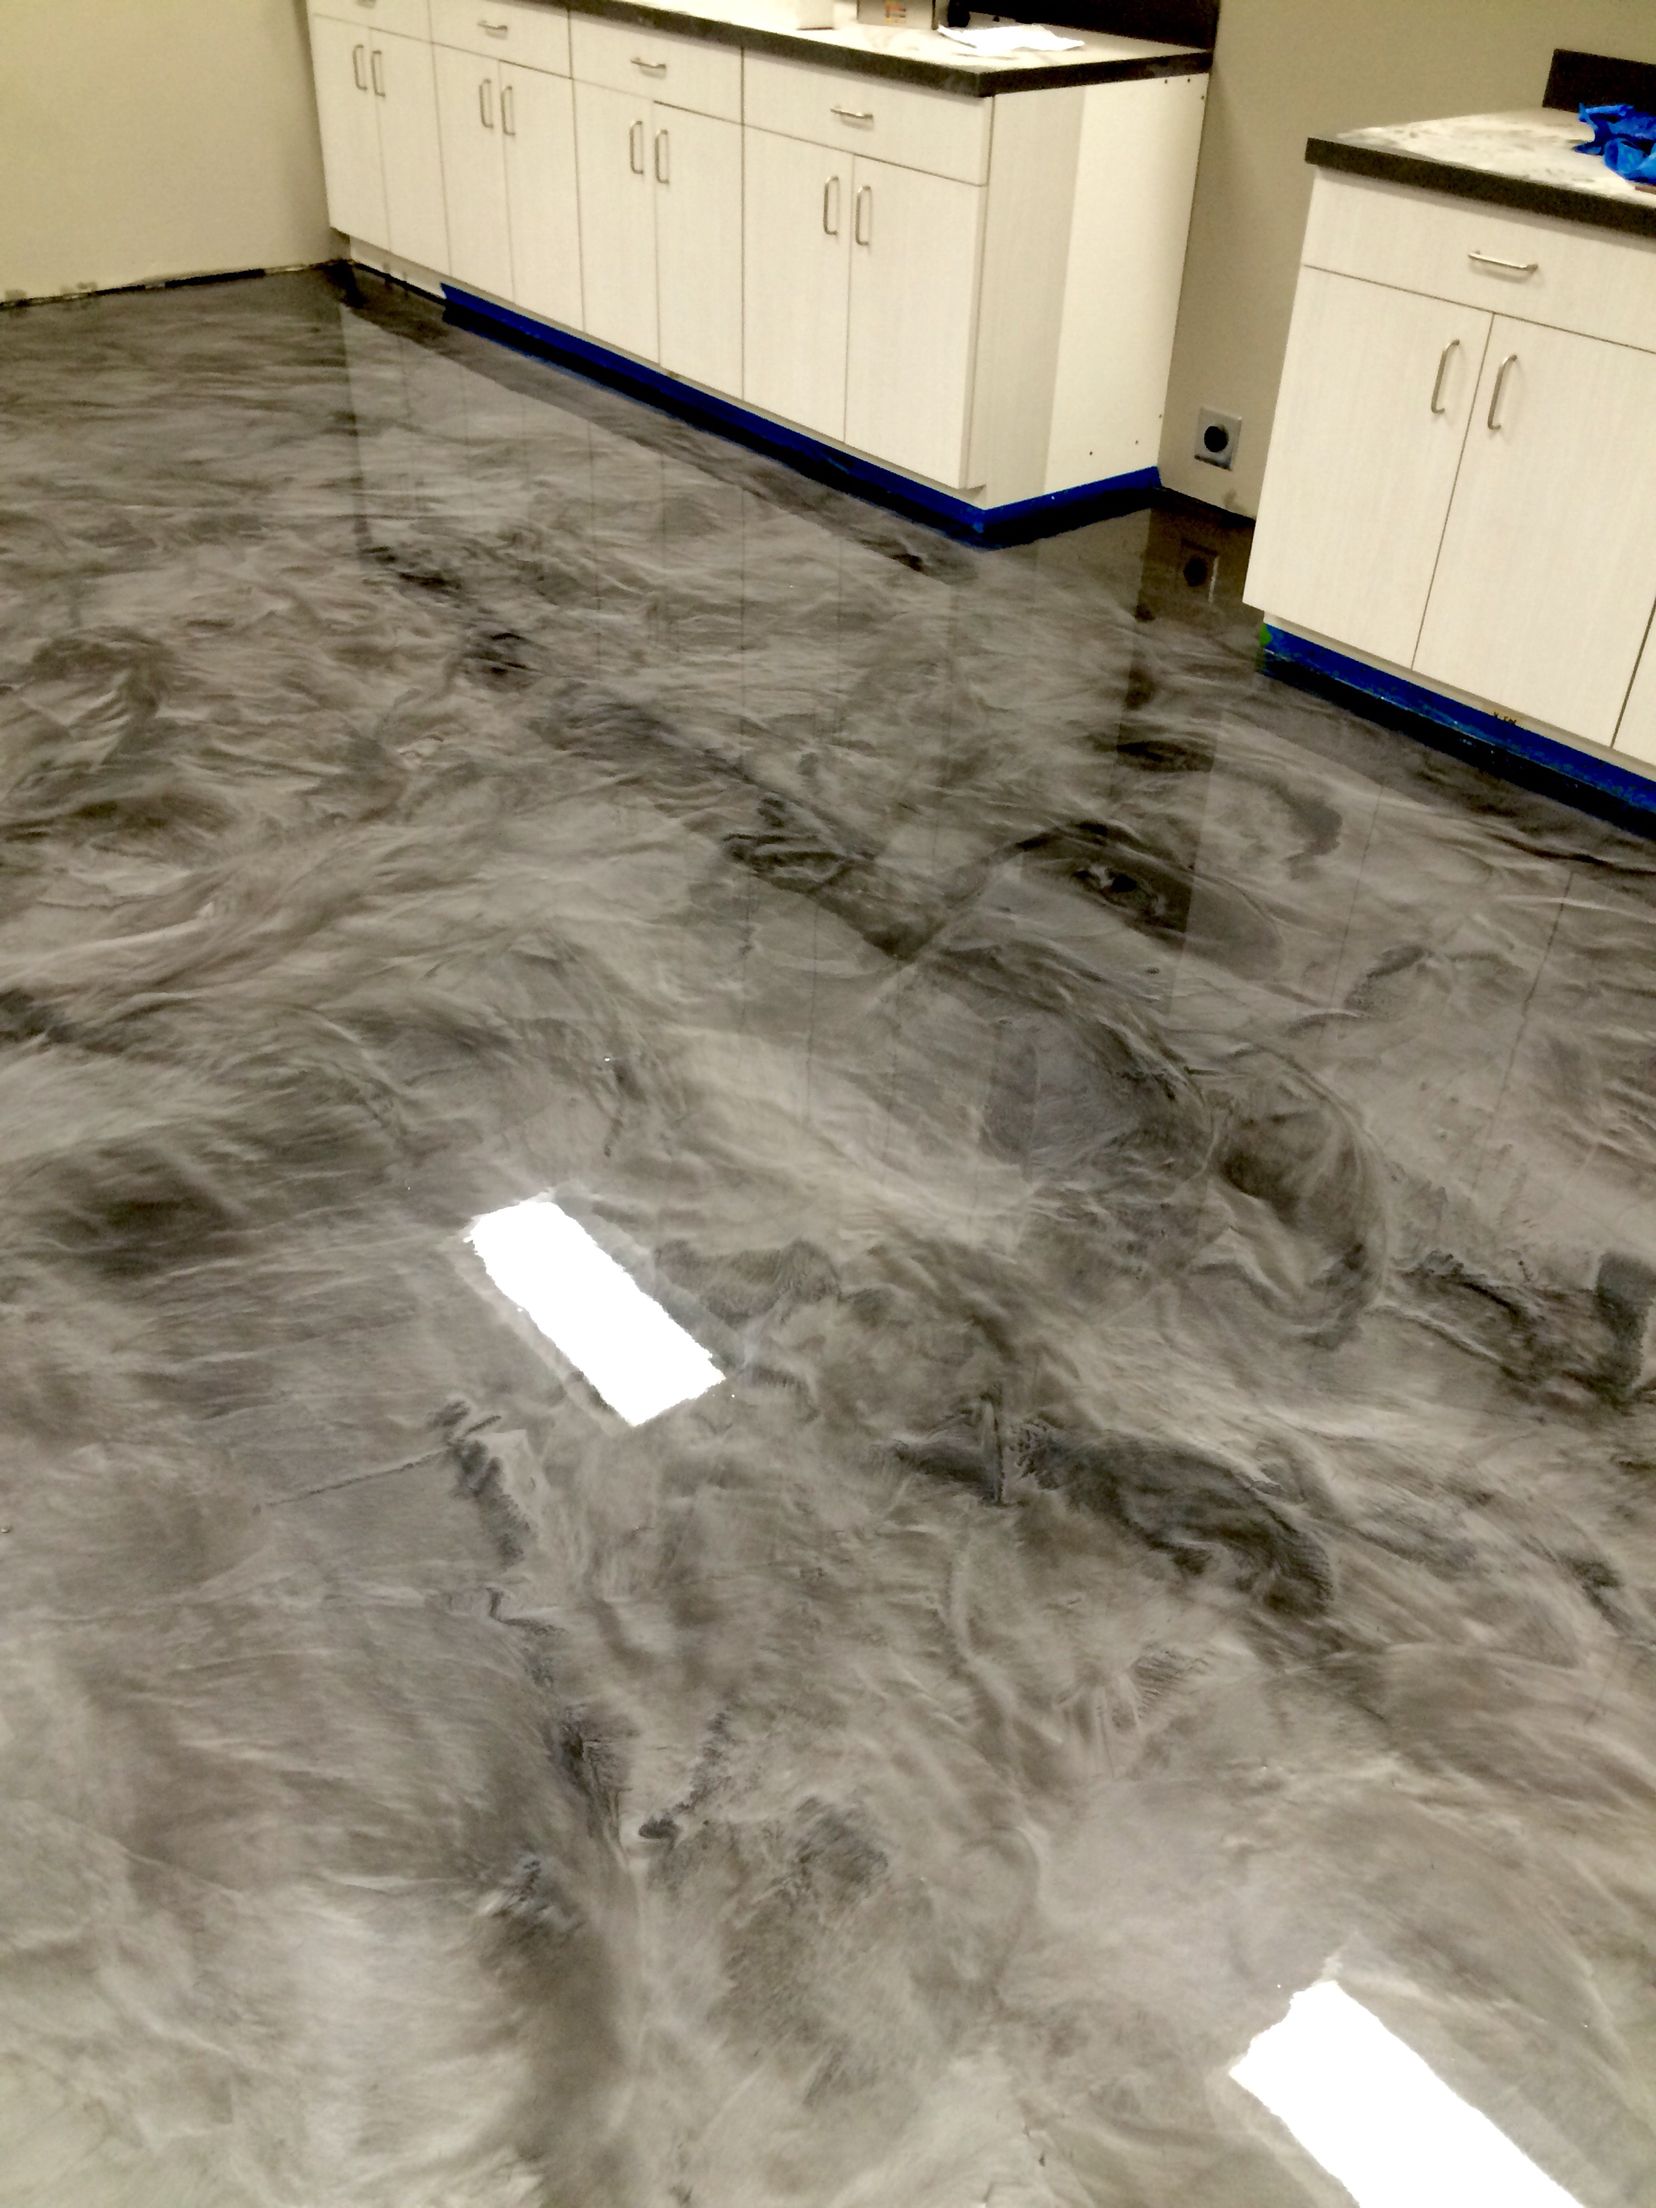 Dress Up Your Business with Epoxy Floors